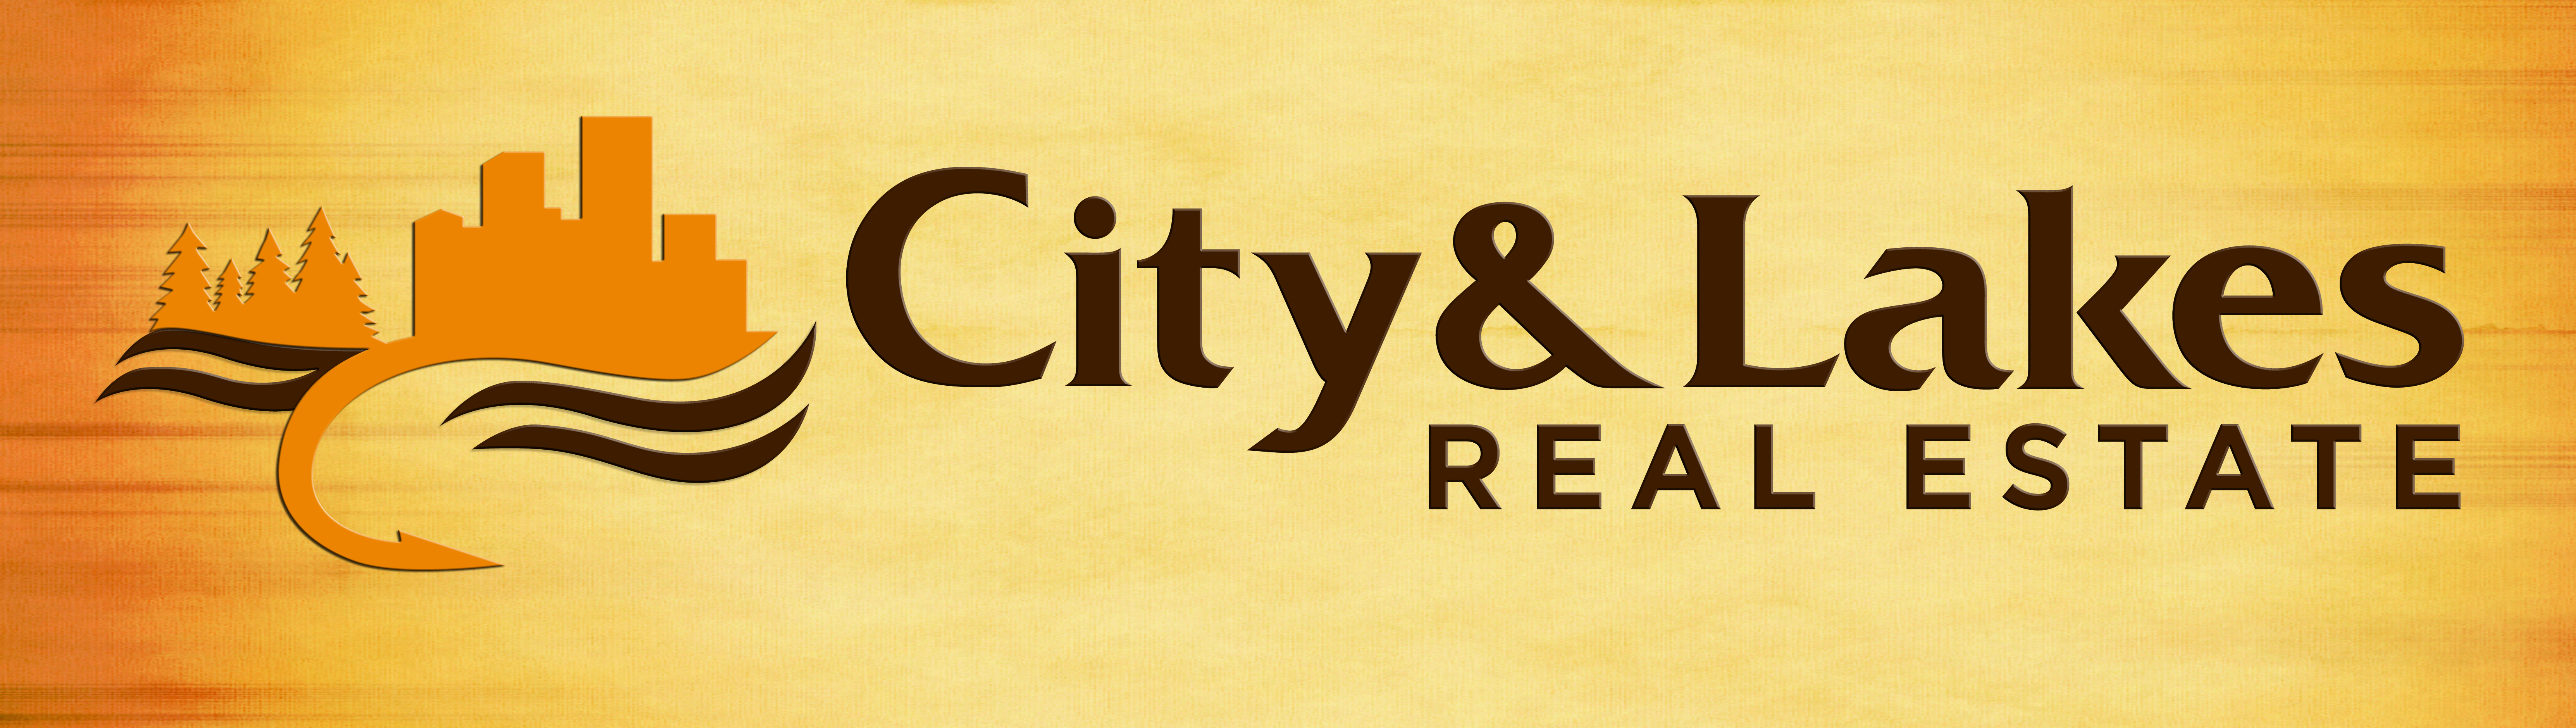 City and Lakes Real Estate